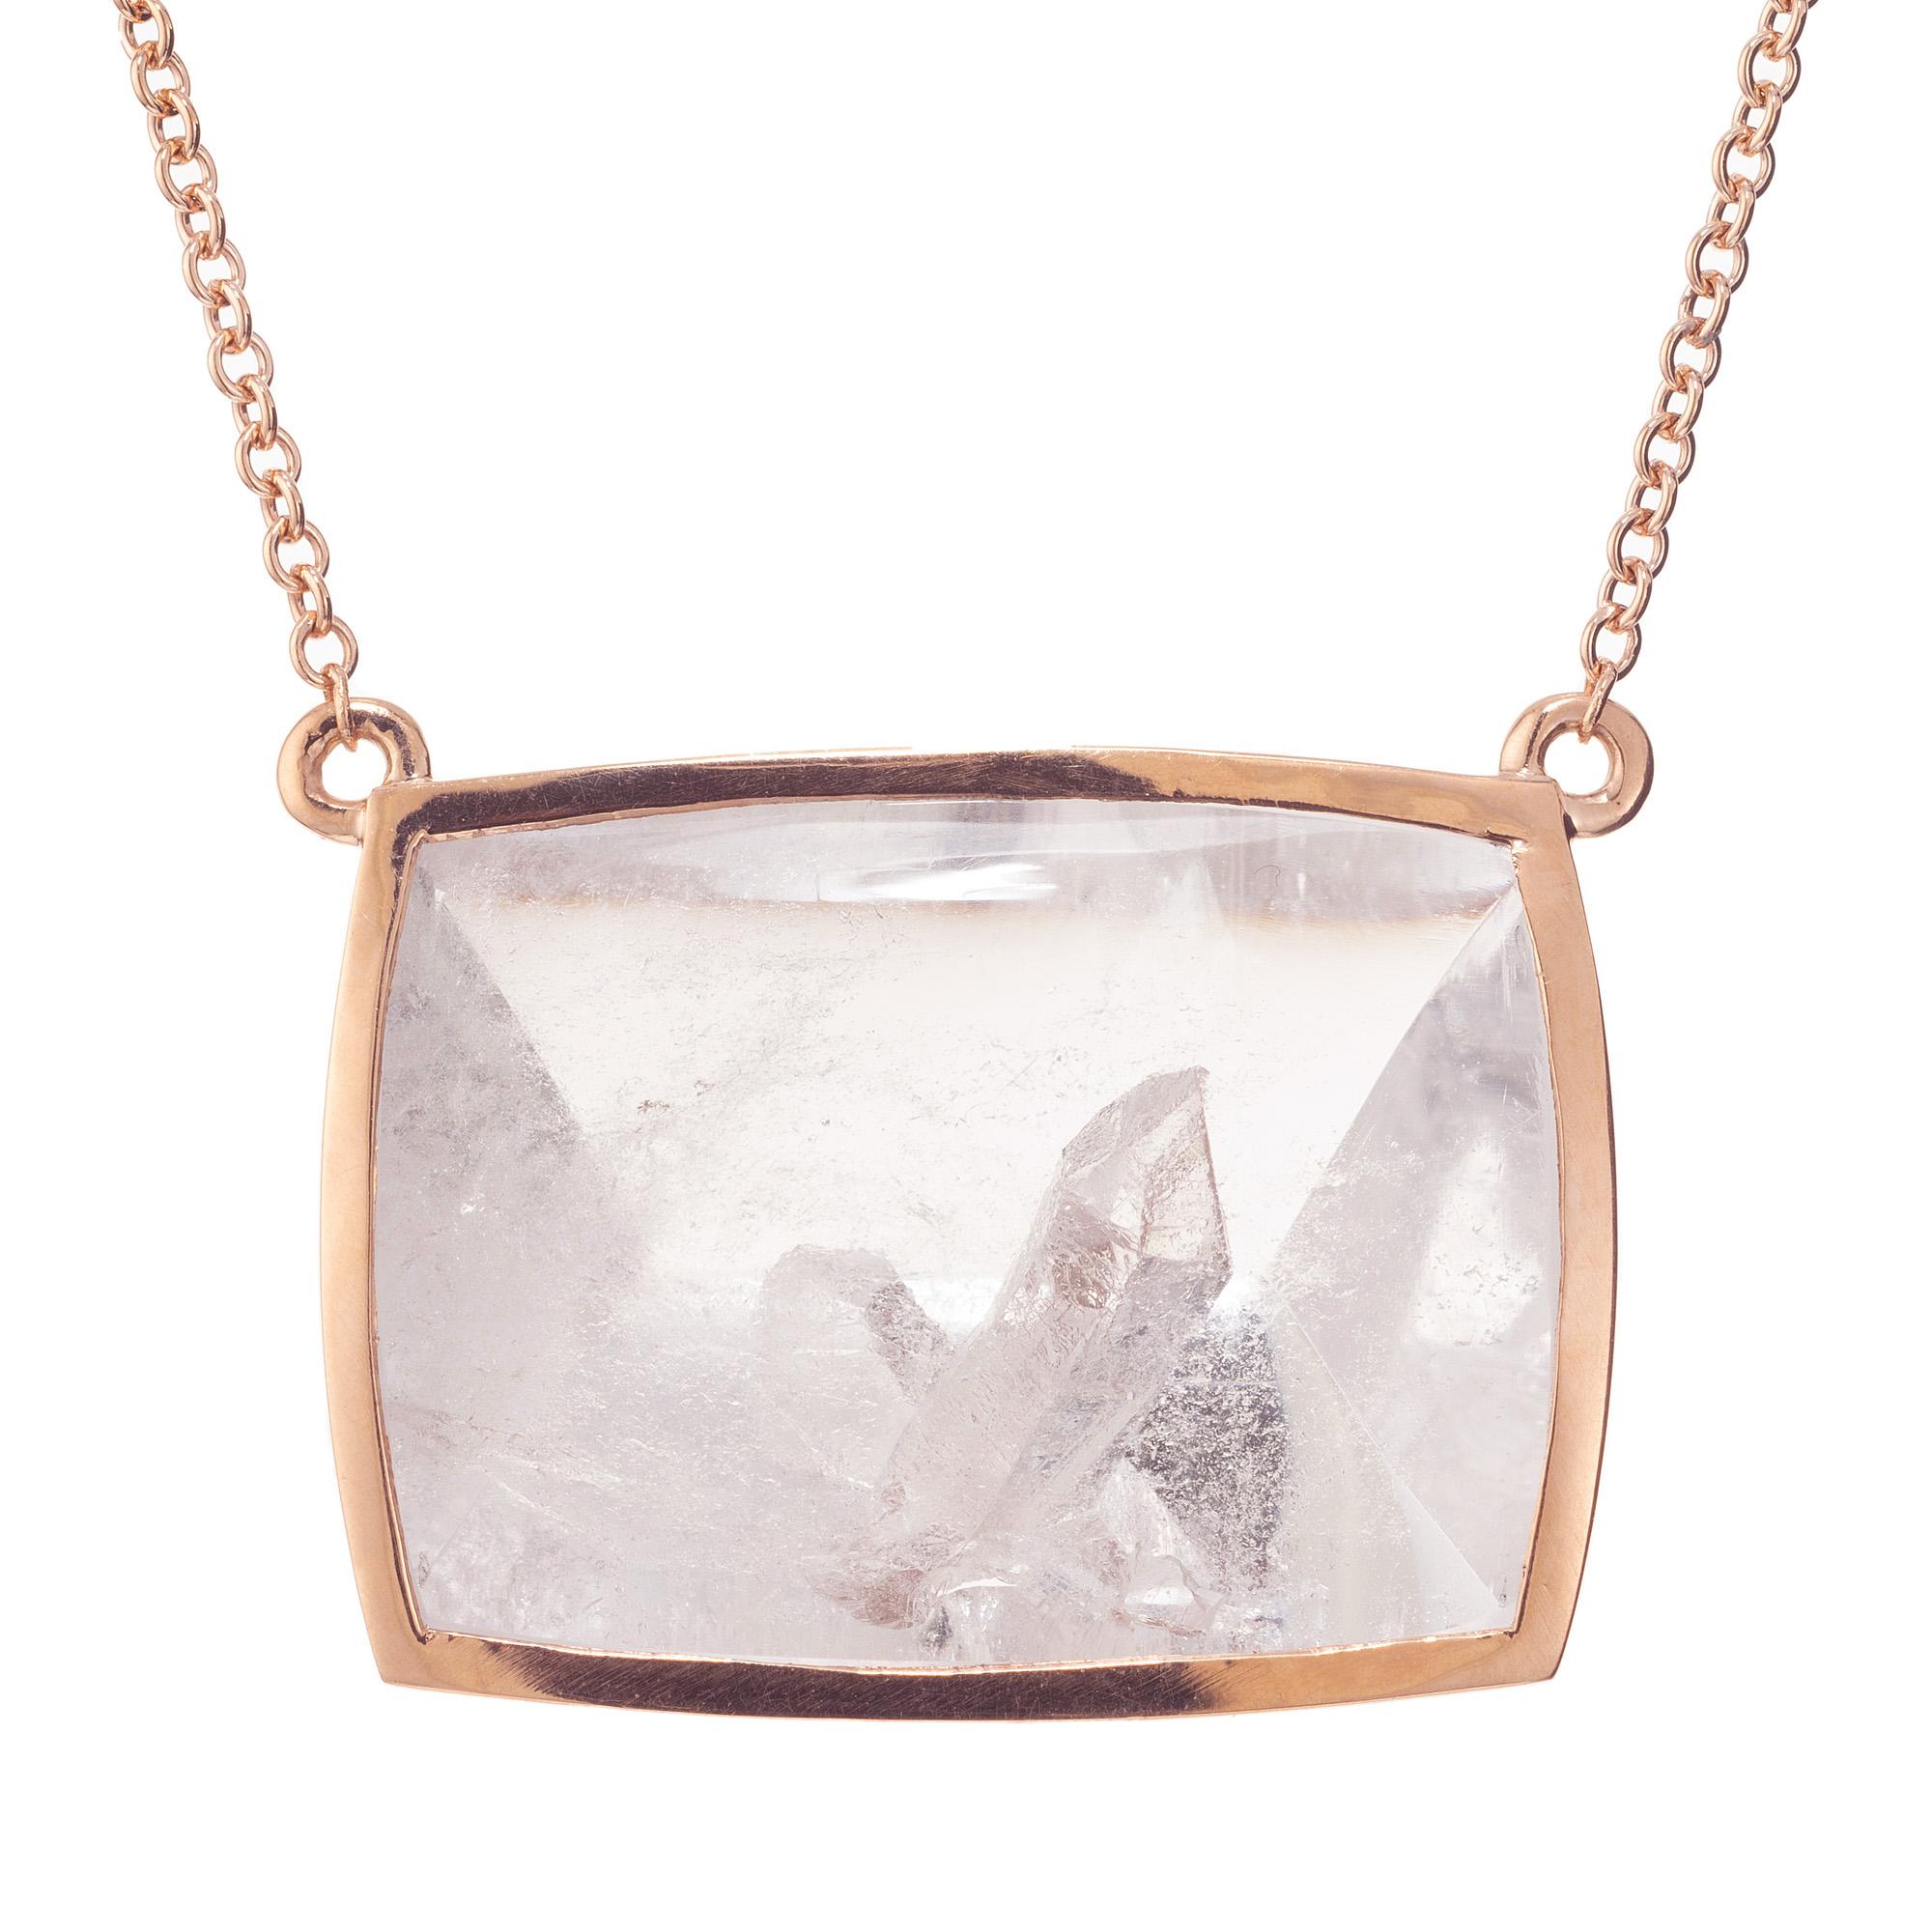 Manifestor crystals are almost the rarest of all Quartz formations. This 38.44ct custom cut crystal is framed in 14k rose gold and completed with a 18.75 inch necklace. A Quartz crystal grows to a finished form and is then later encased in Quartz